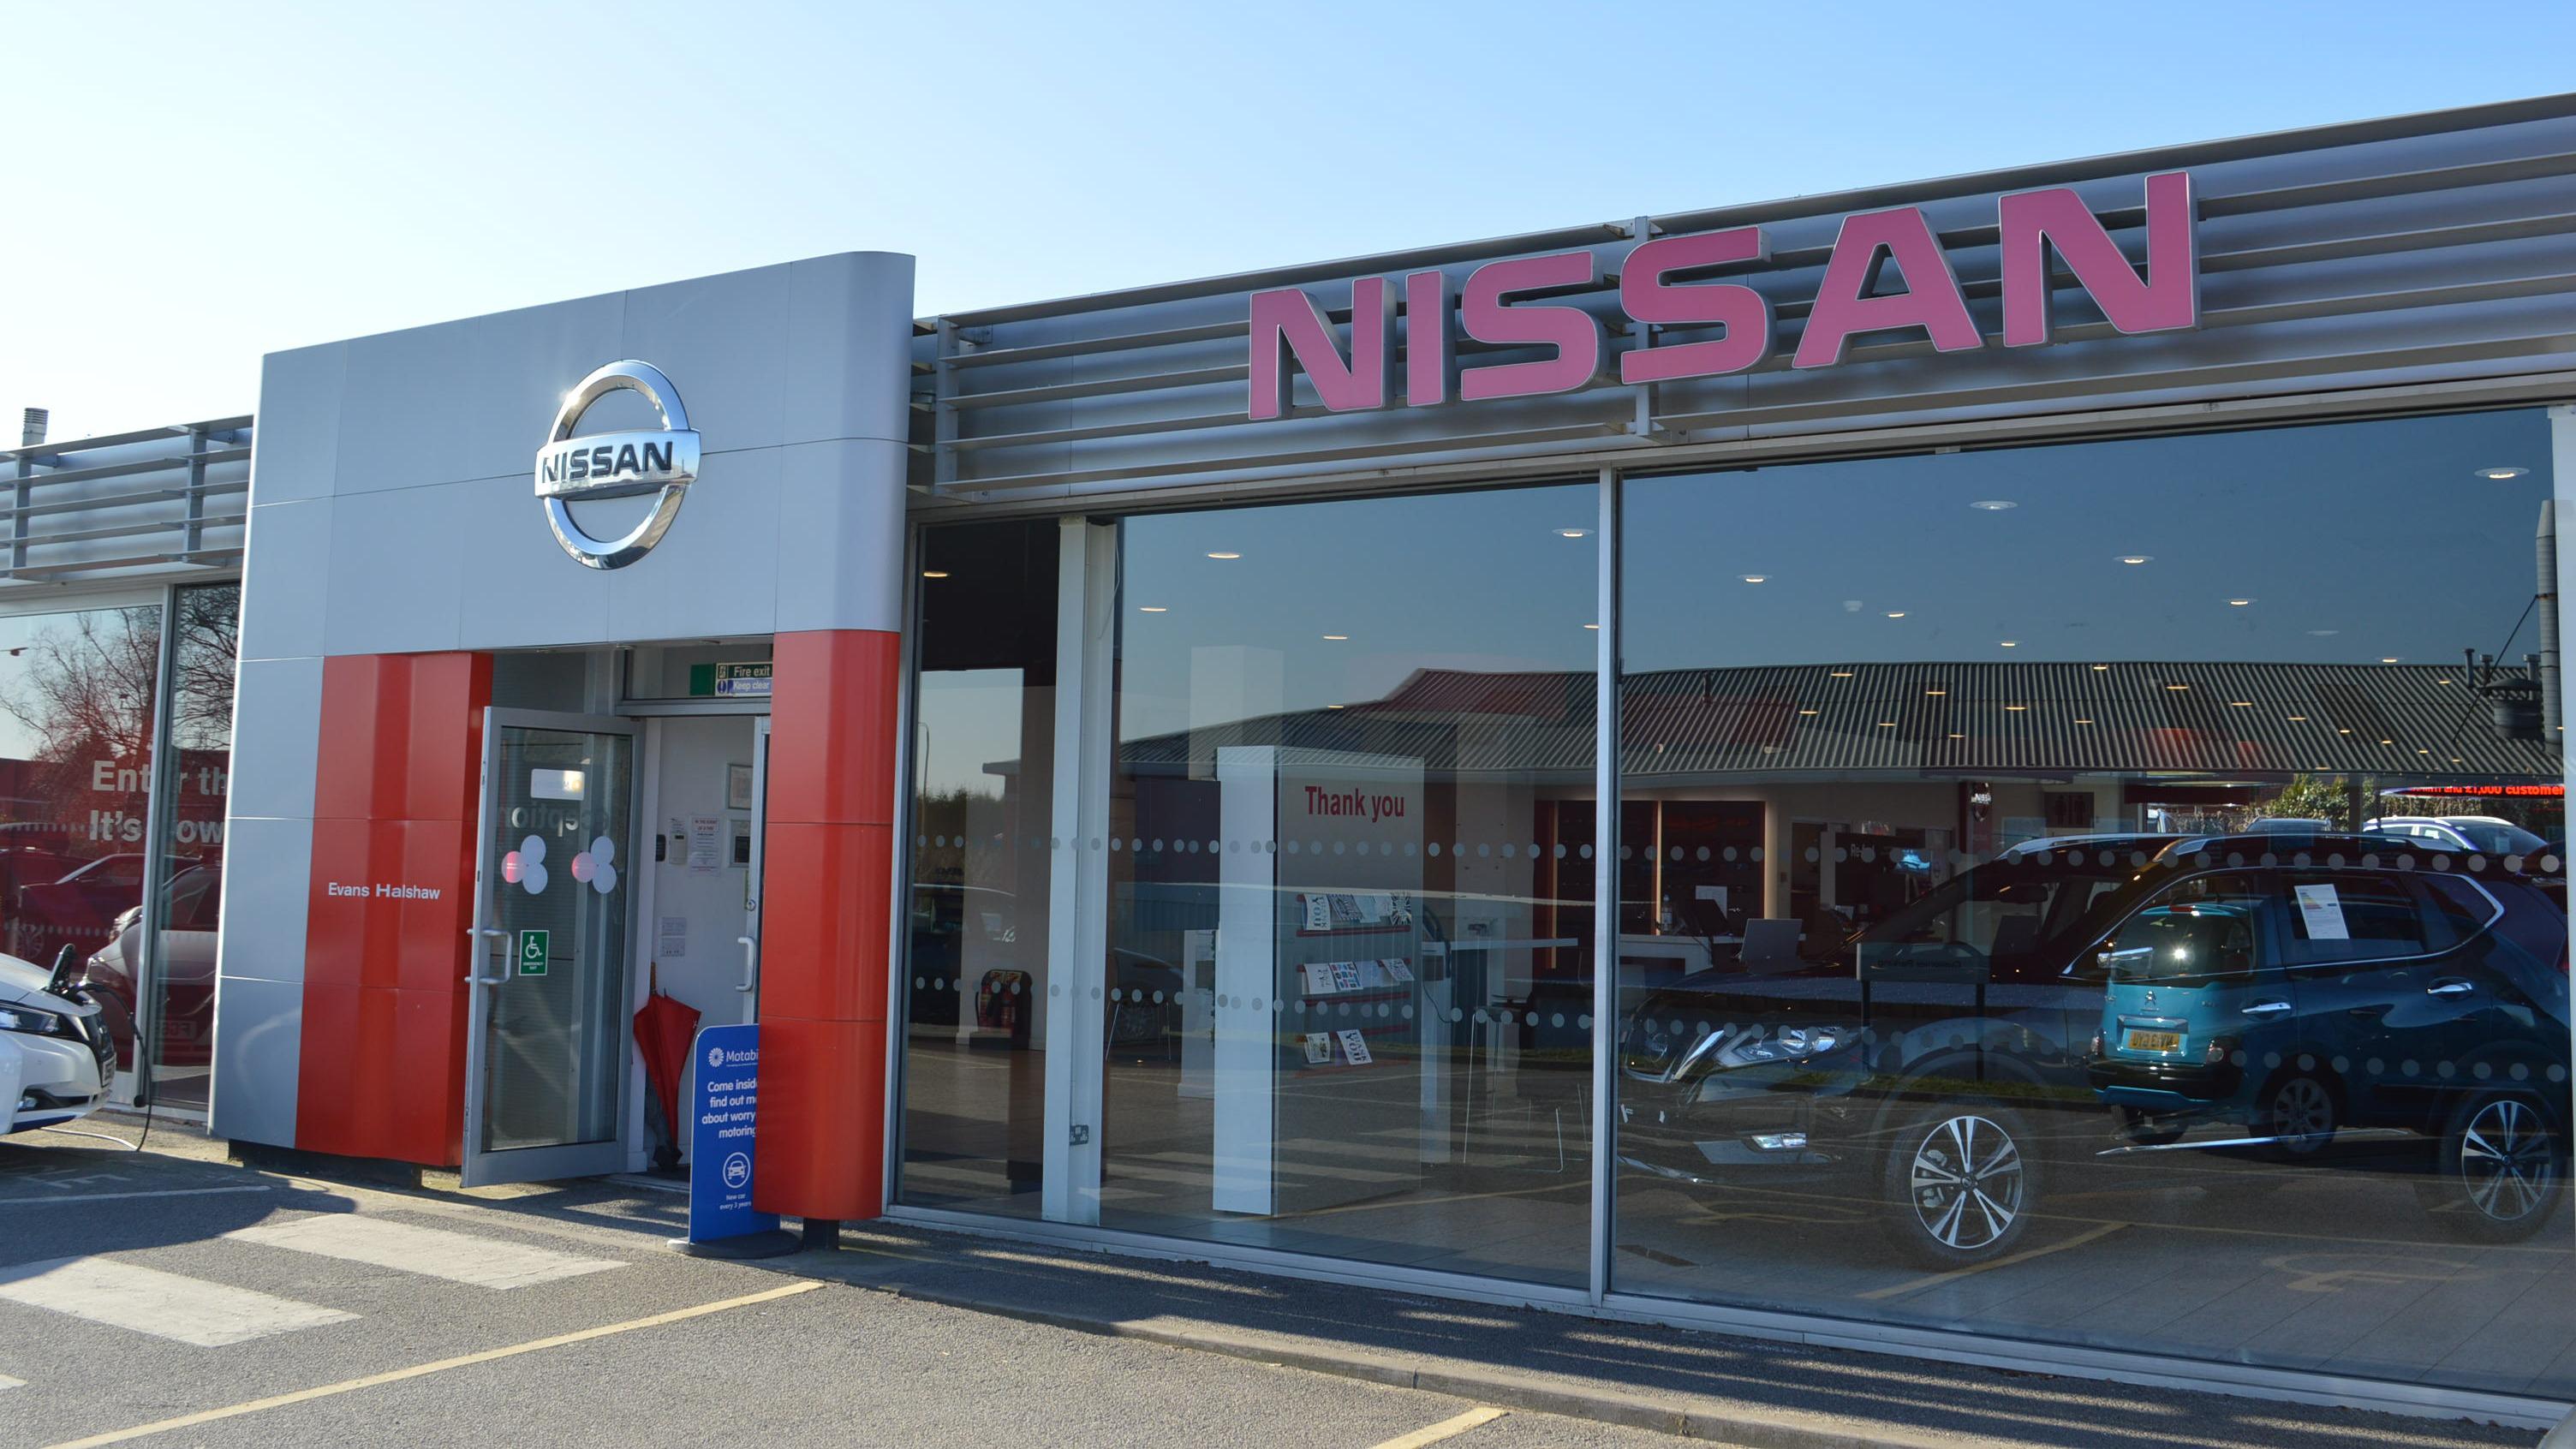 Outside the Nissan Mansfield dealership Evans Halshaw Mansfield Nissan Authorised Repairer & Used Car Centre Mansfield 01623 787878